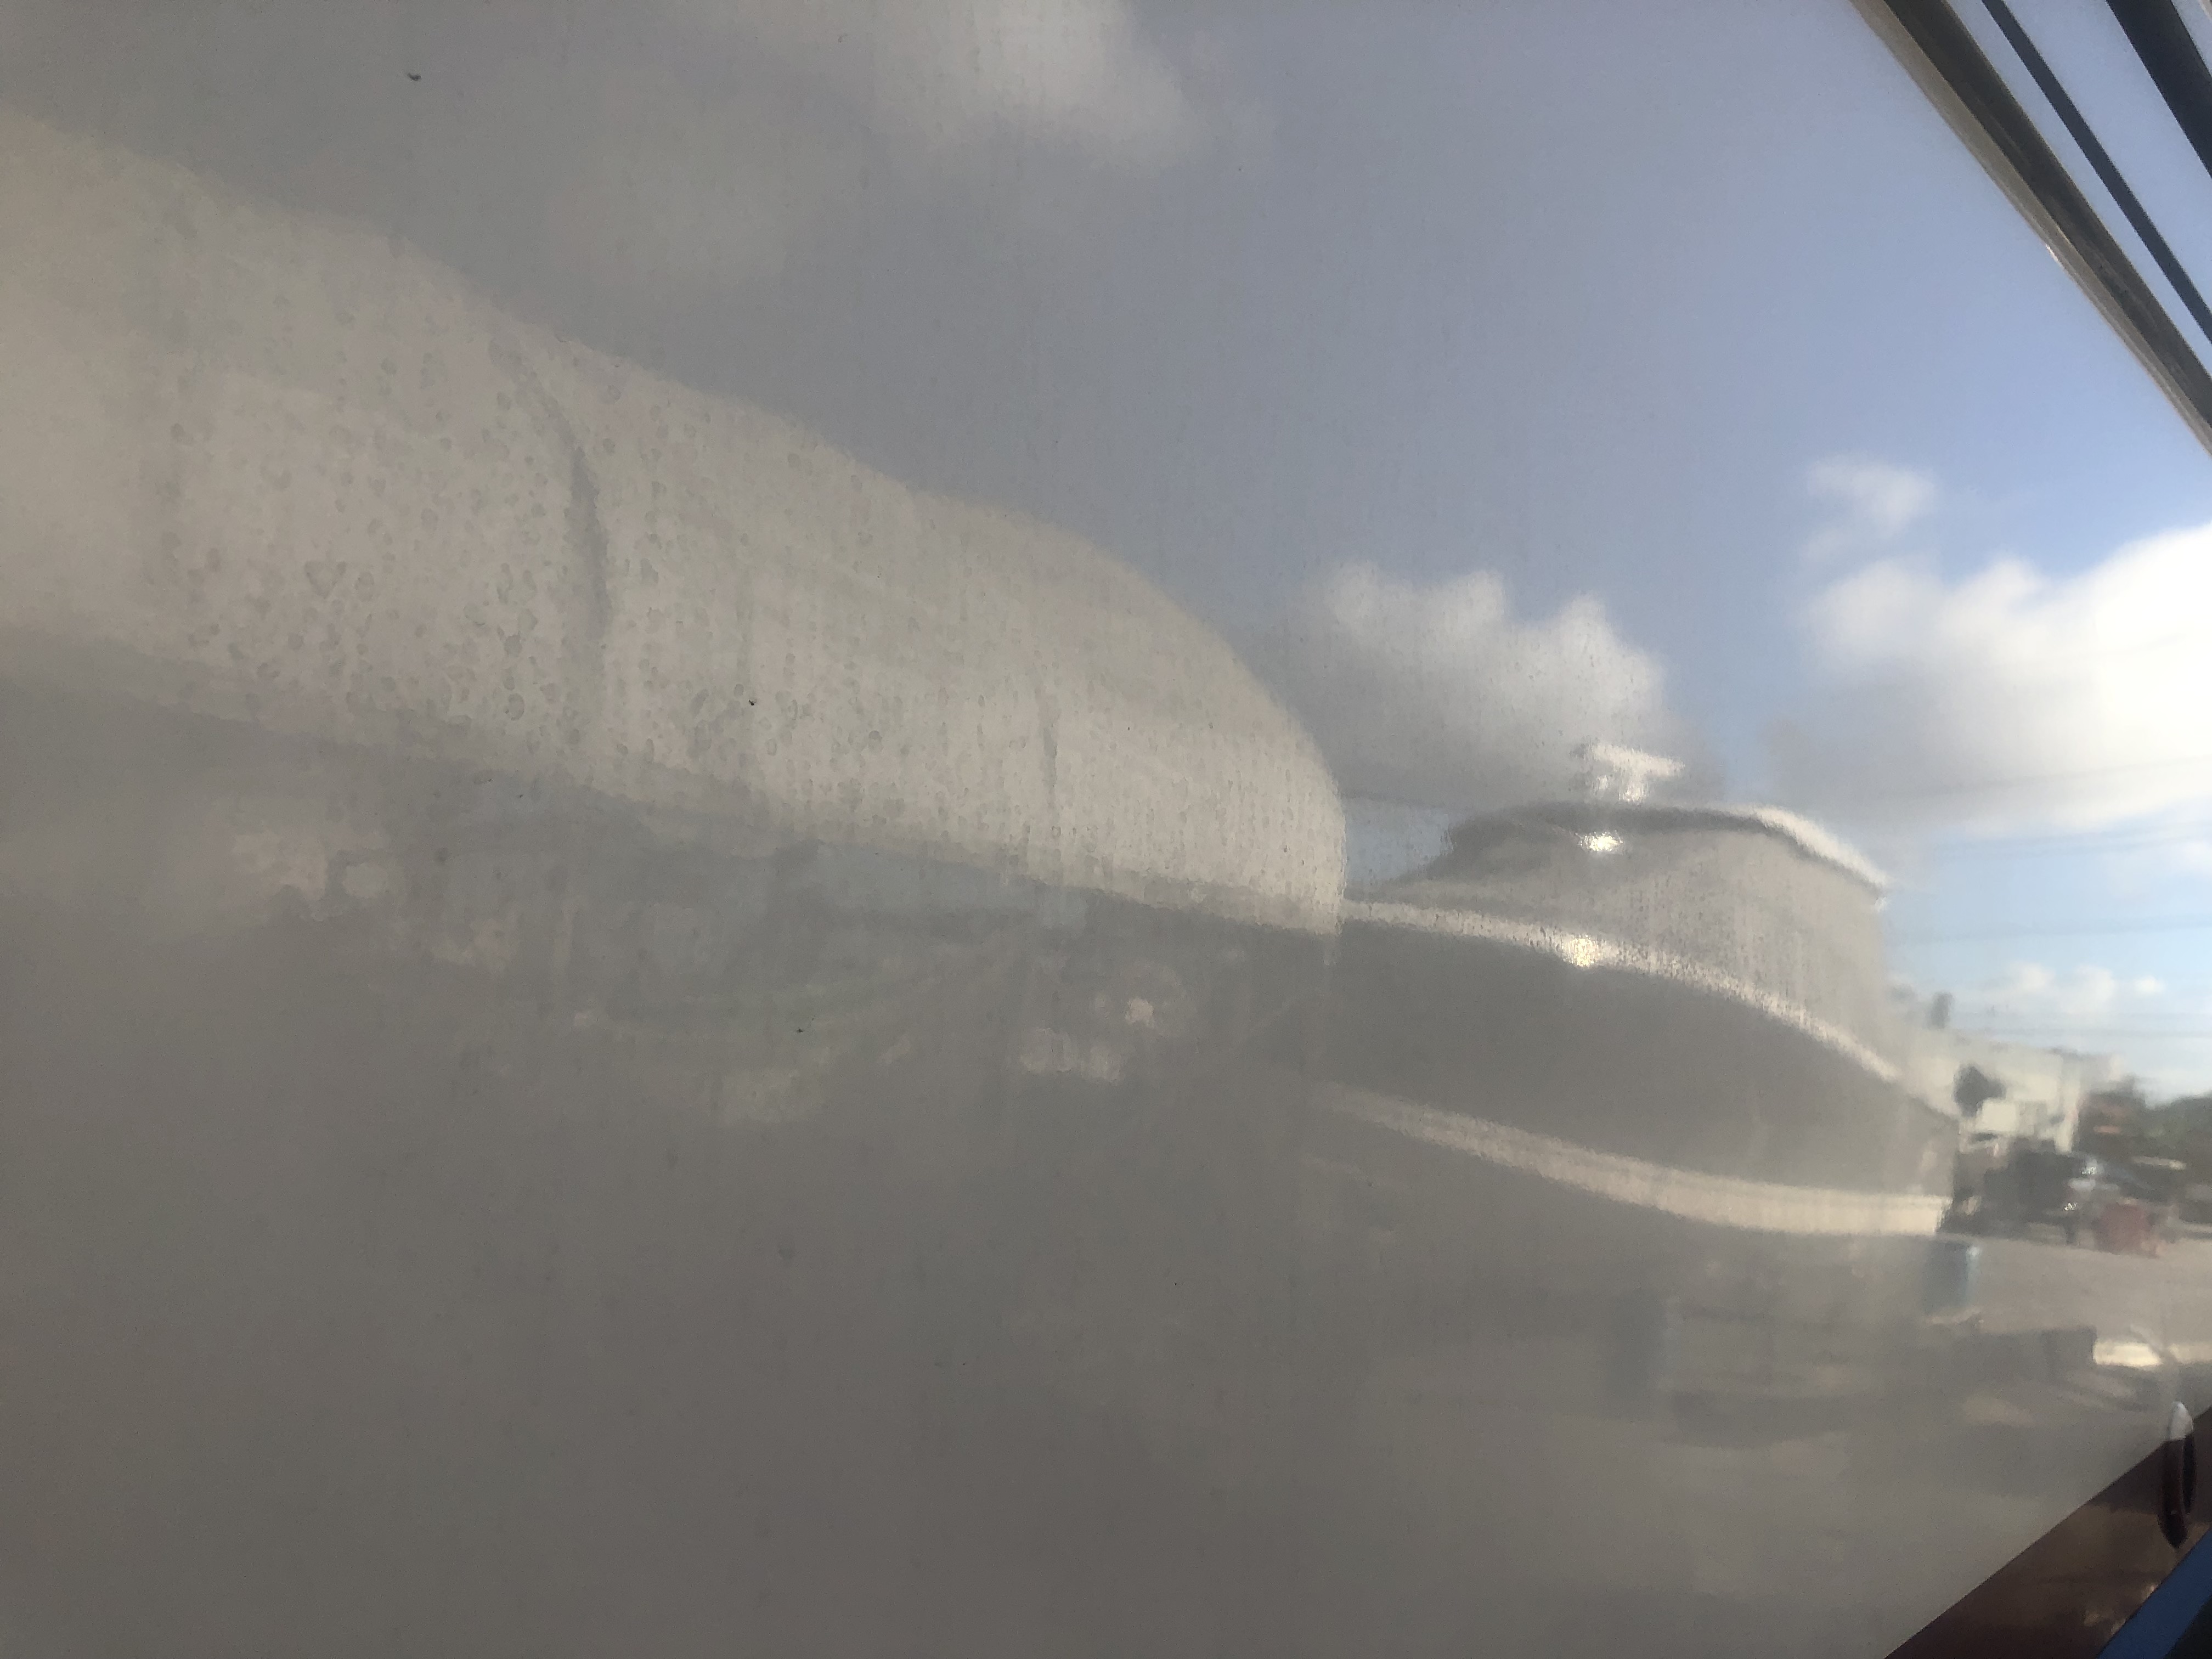 Noticeable watermarks on the hull of the boat